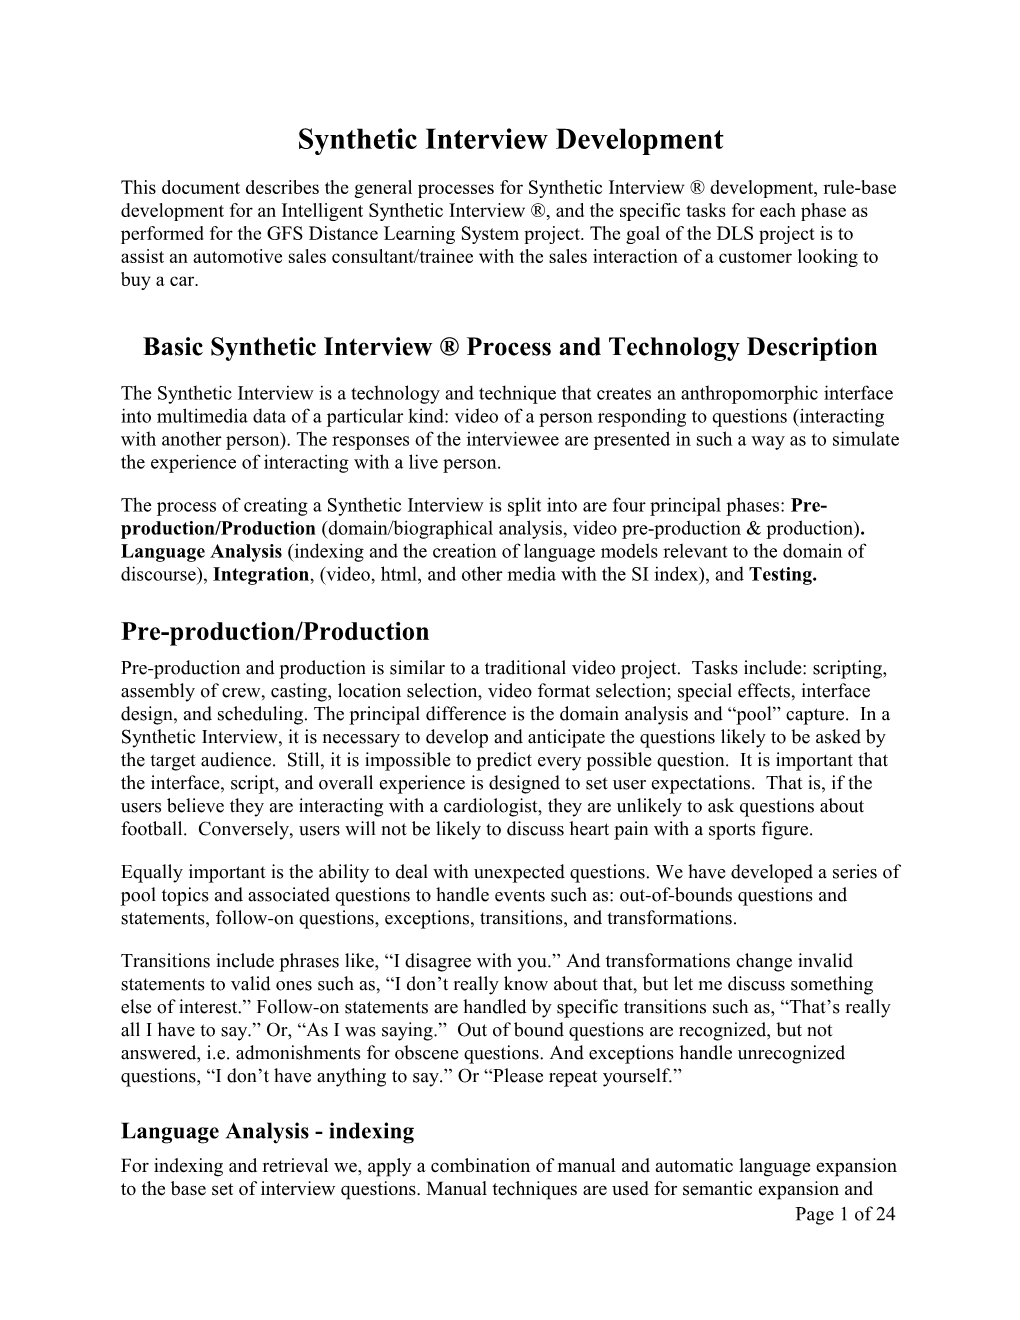 Basic Synthetic Interview Process and Technology Description